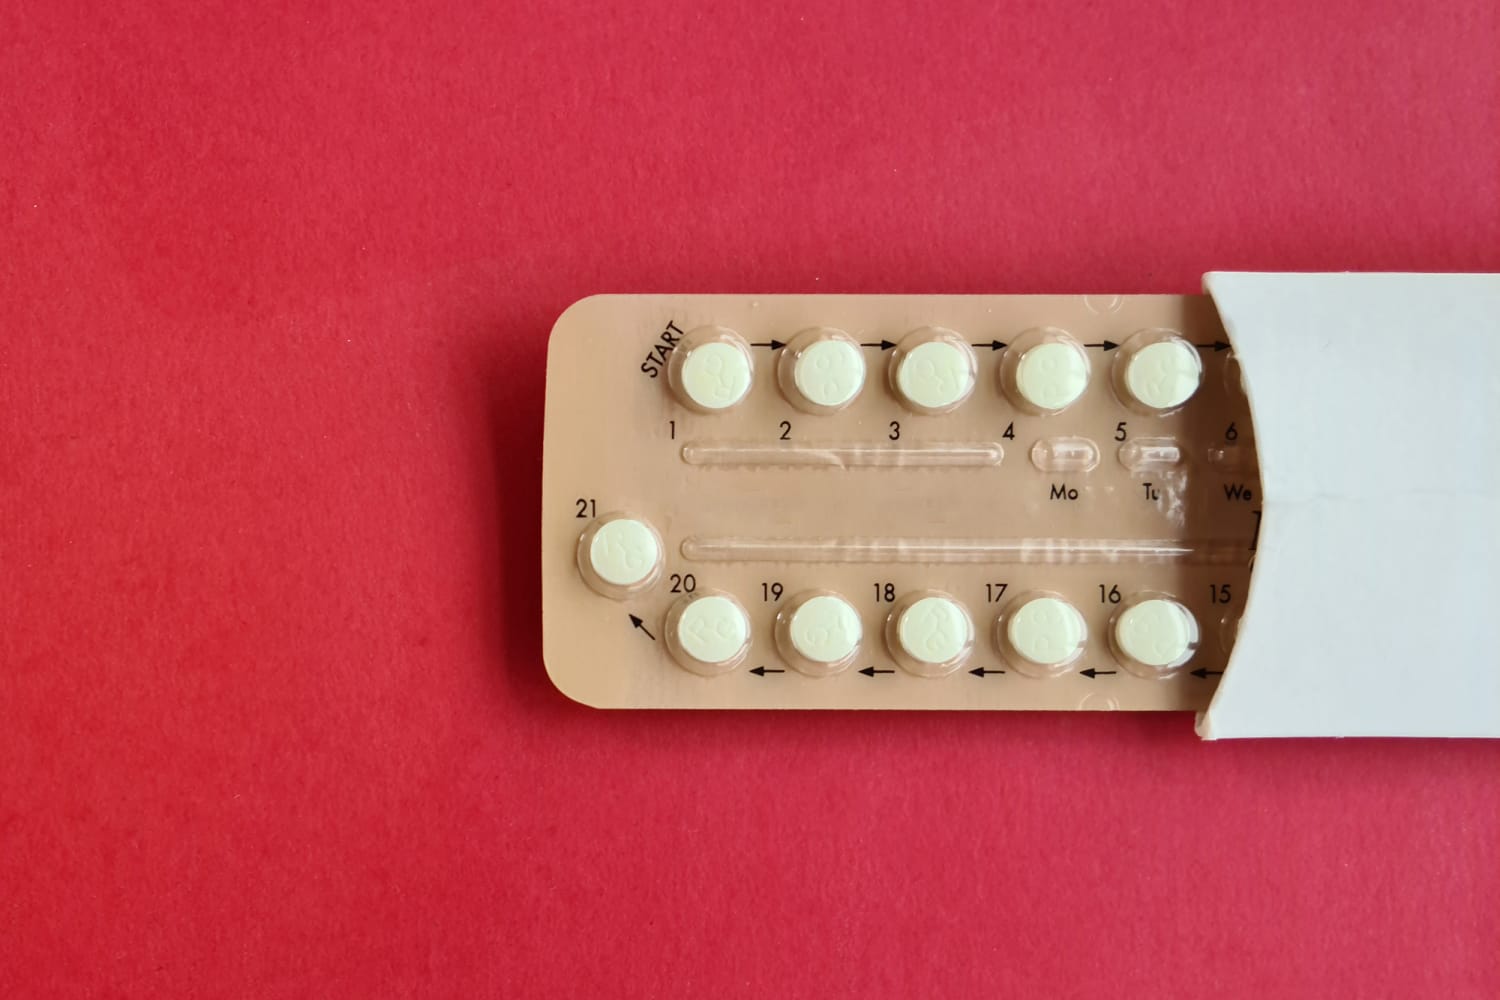 Birth control methods that use one hormone raise breast cancer risk as much as those with a combo, study finds